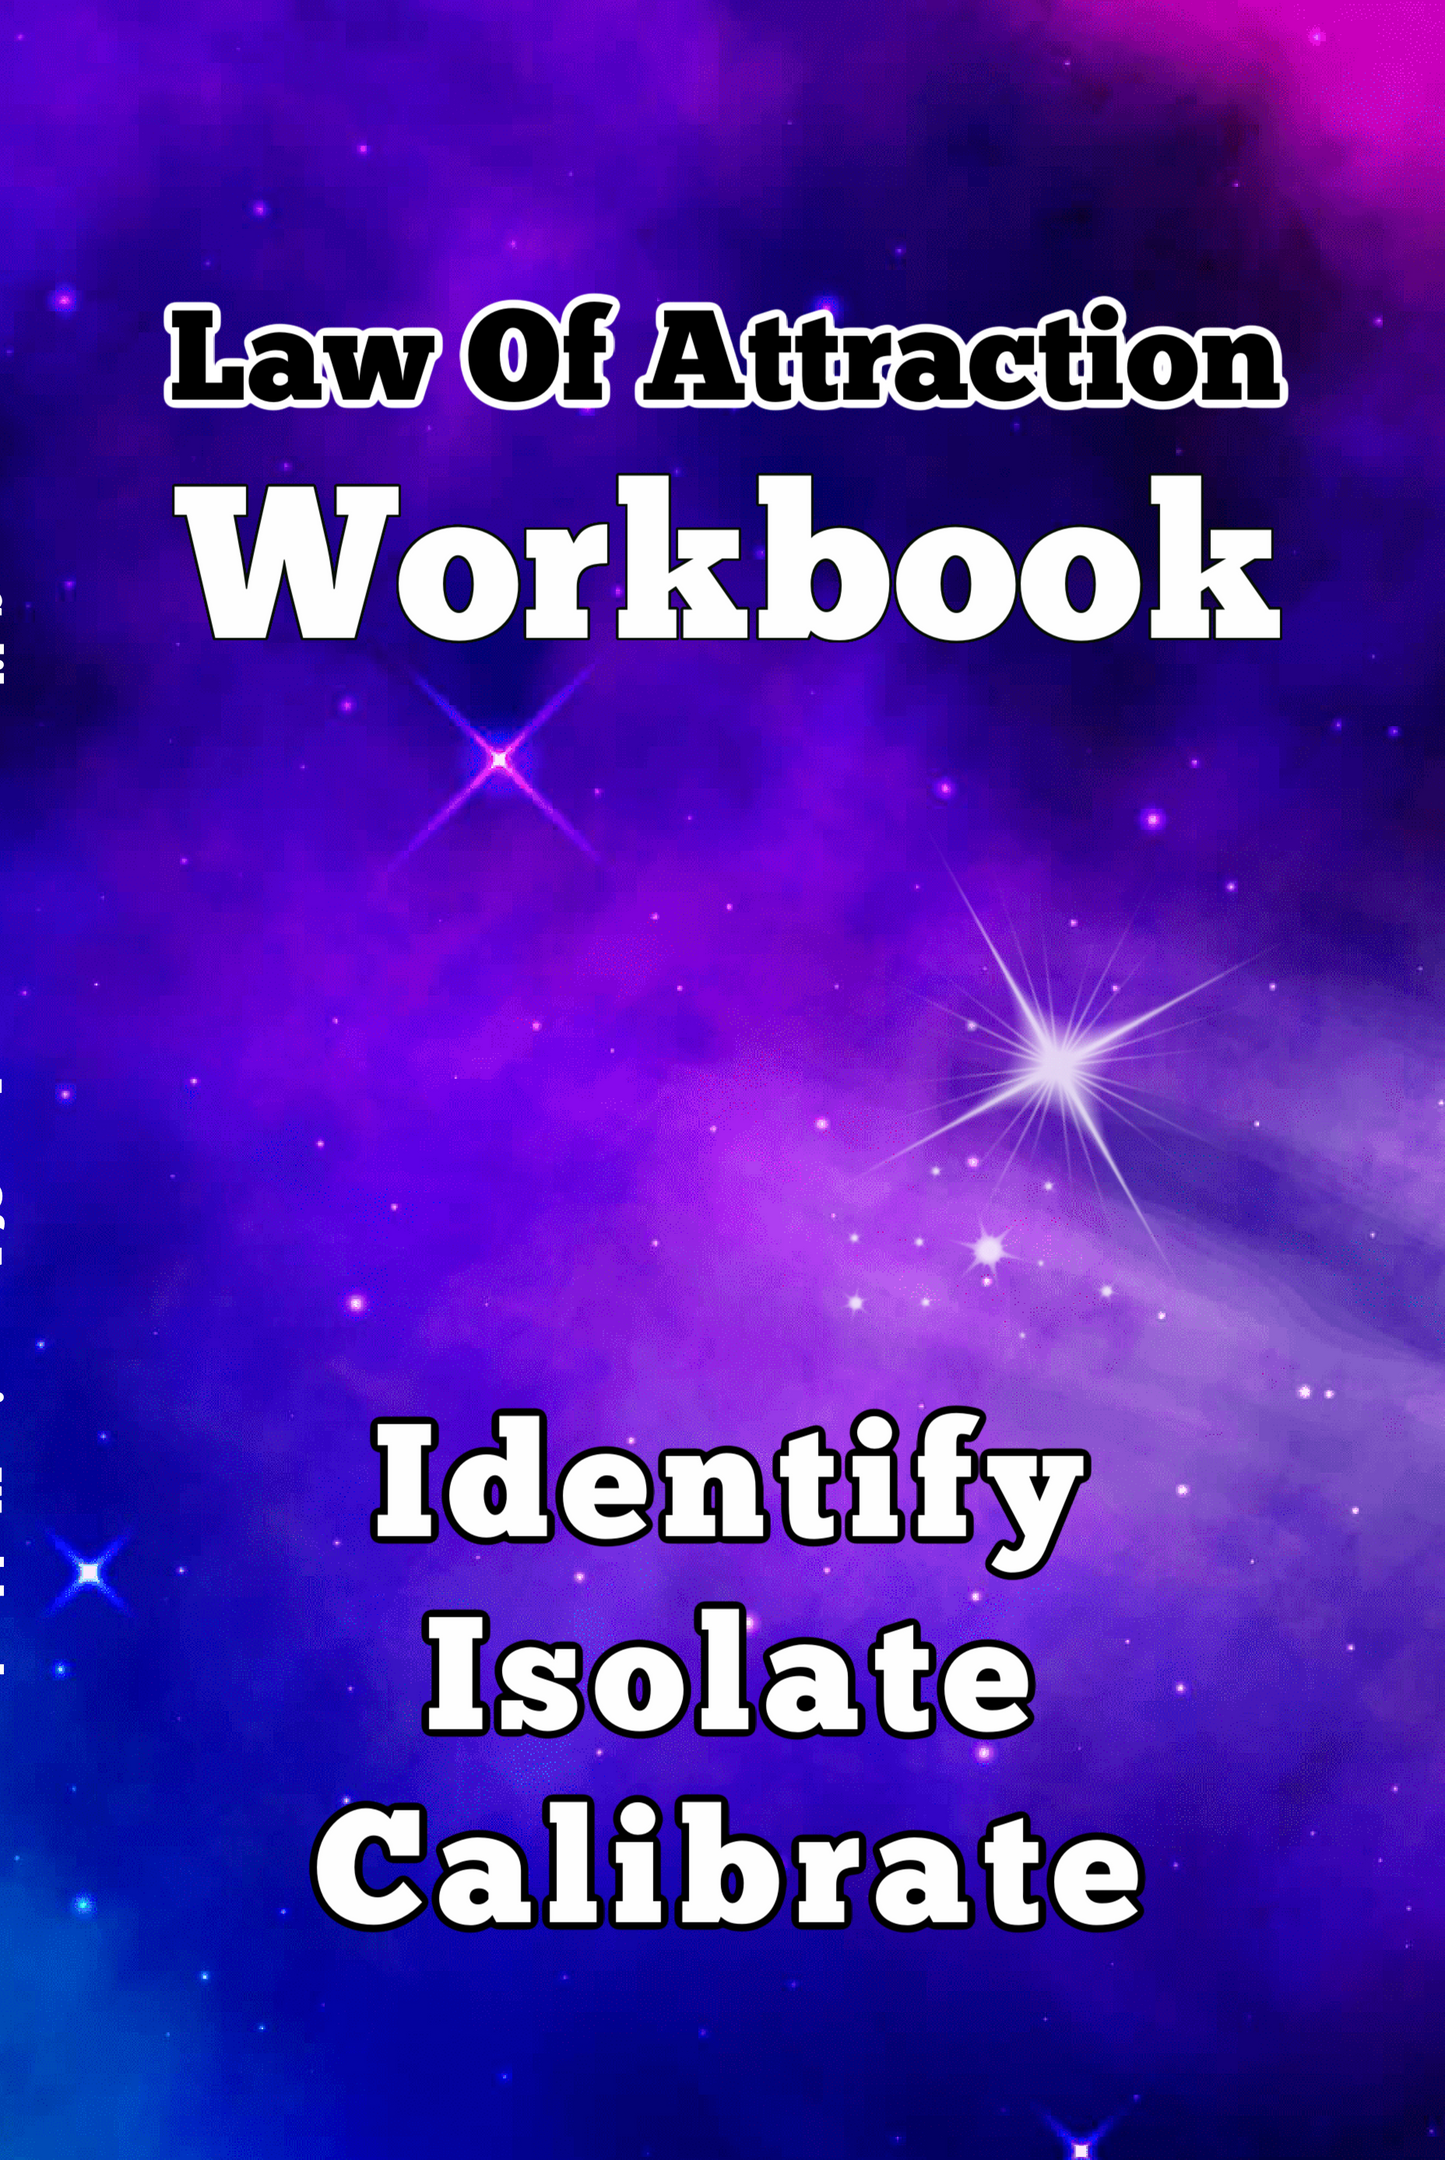 Identify. Isolate. Calibrate. 7 Day Law Of Attraction Abraham Hicks Inspired Workbook. Digital